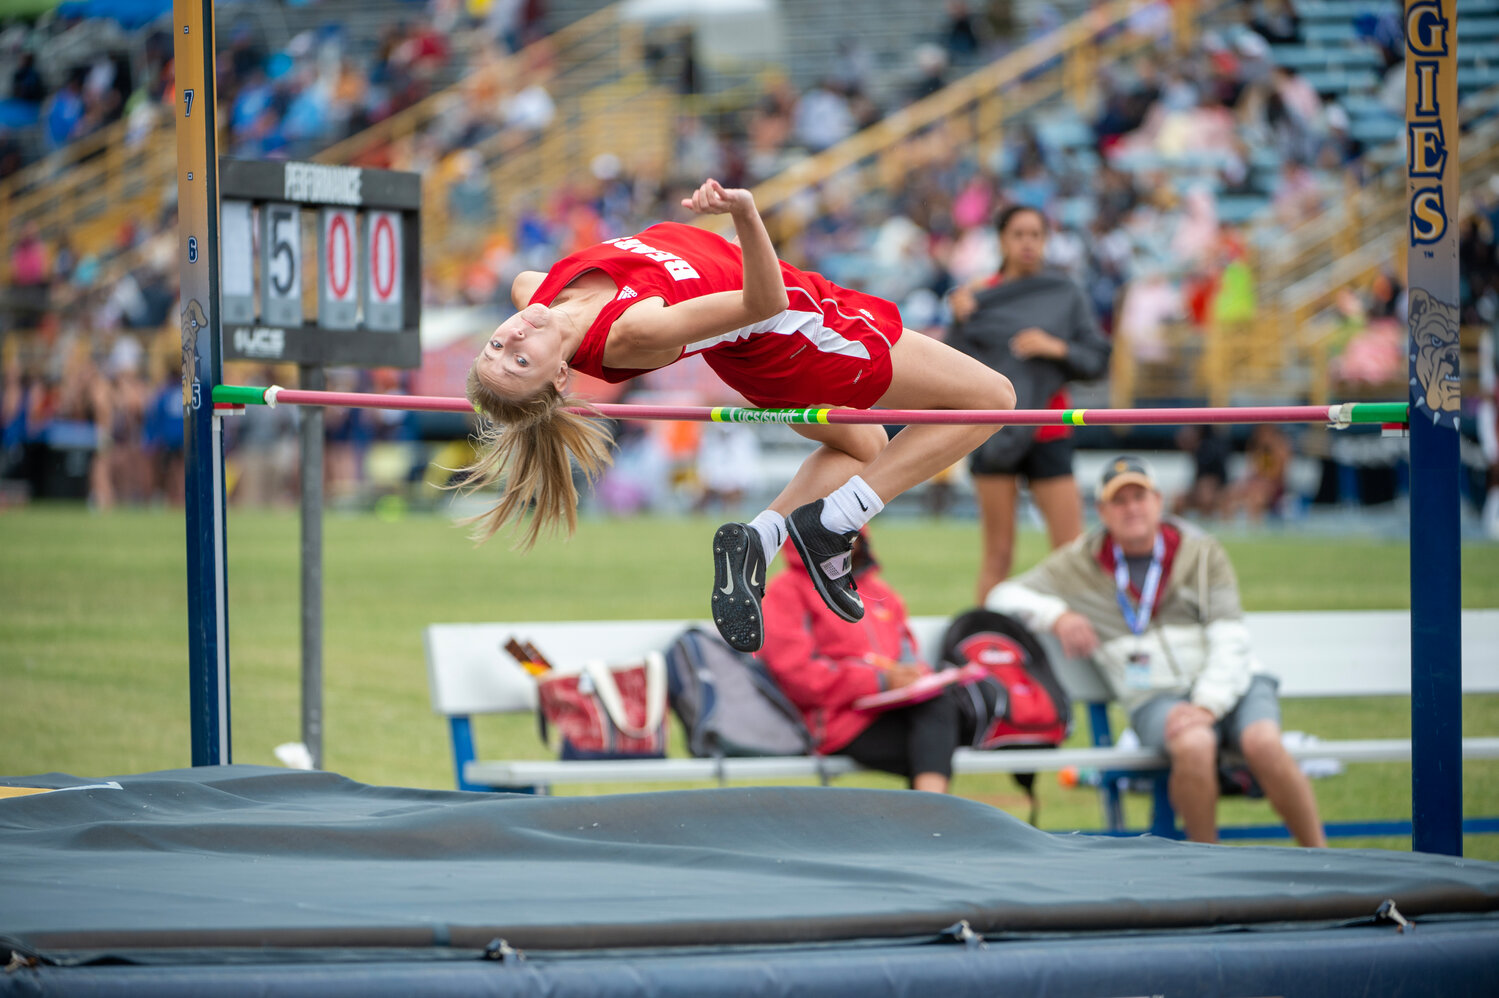 Chatham Central’s Kailey Green clears 5ft-2in to place 4th in the high jump during the Track and Field State Championship at North Carolina A&T in Greensboro, N.C. on Friday